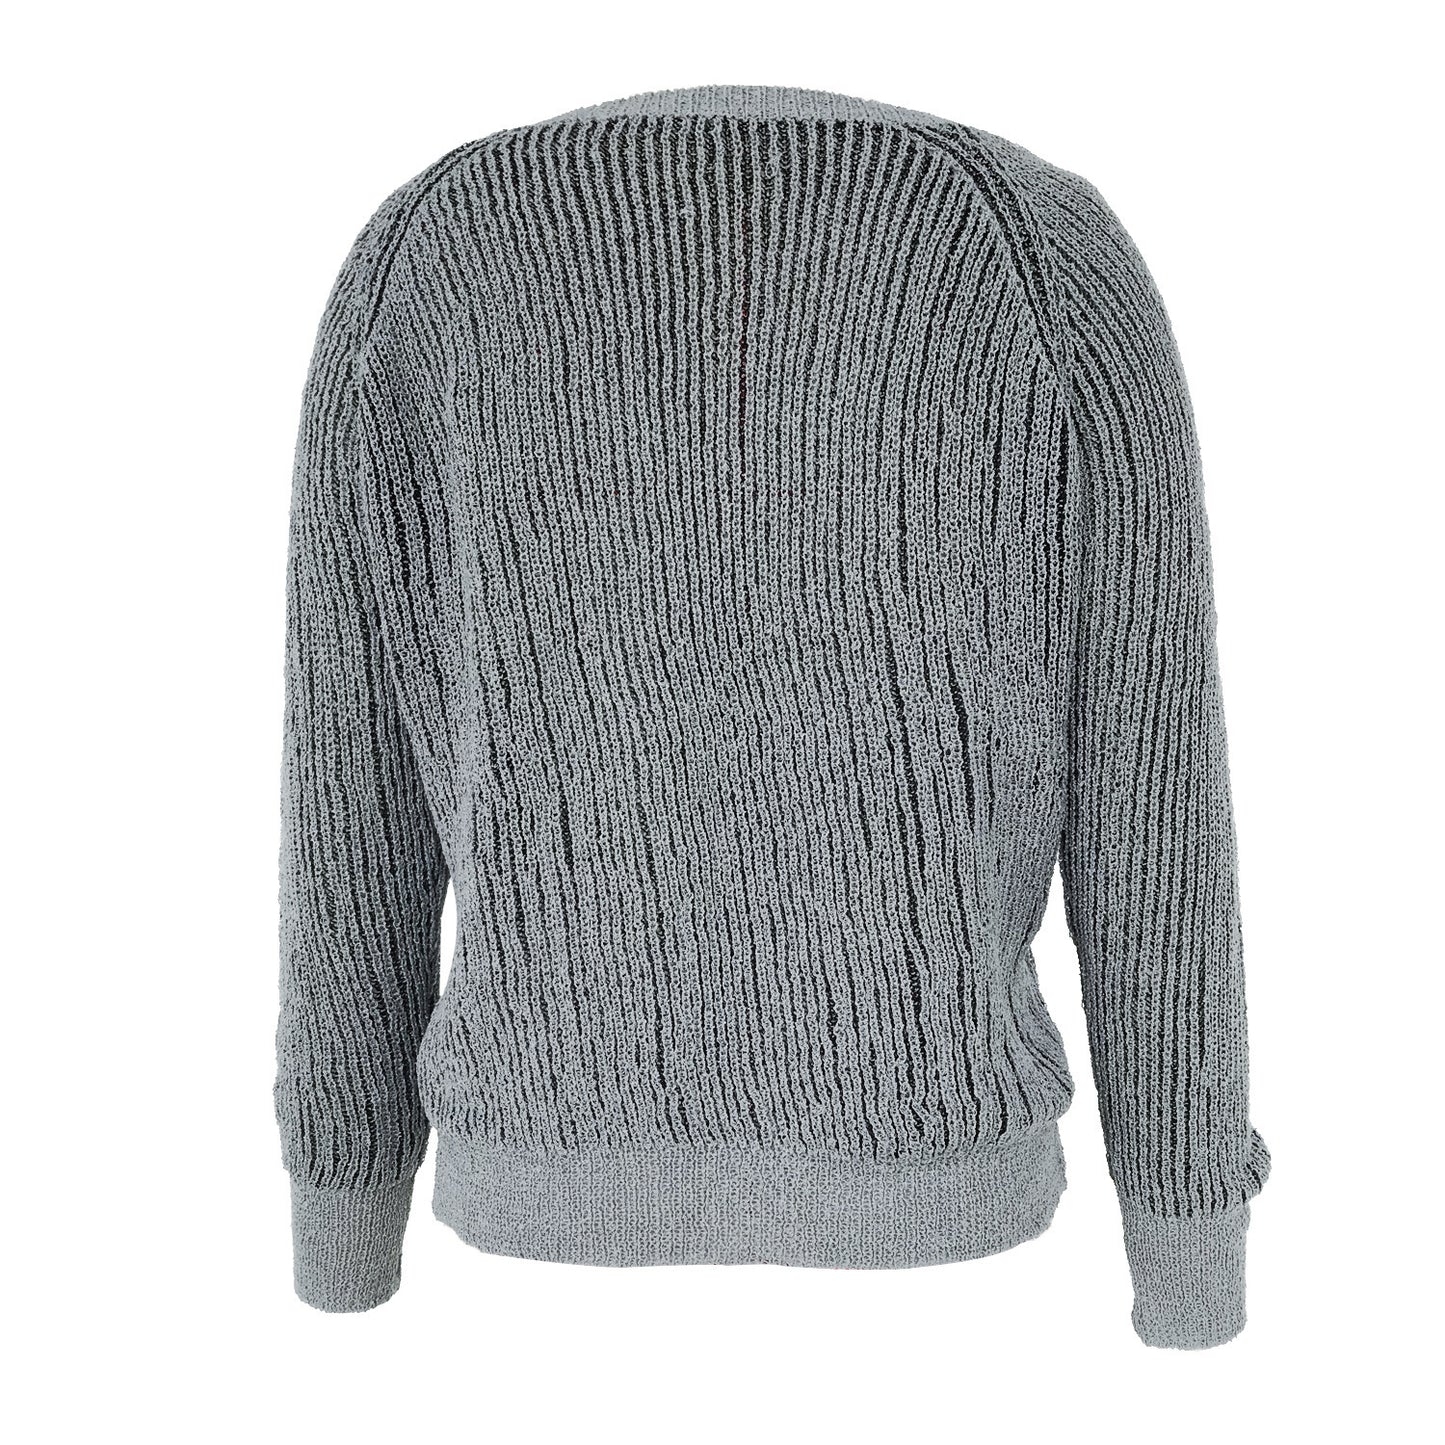 Knit sweater pullover sweater women autumn and winter